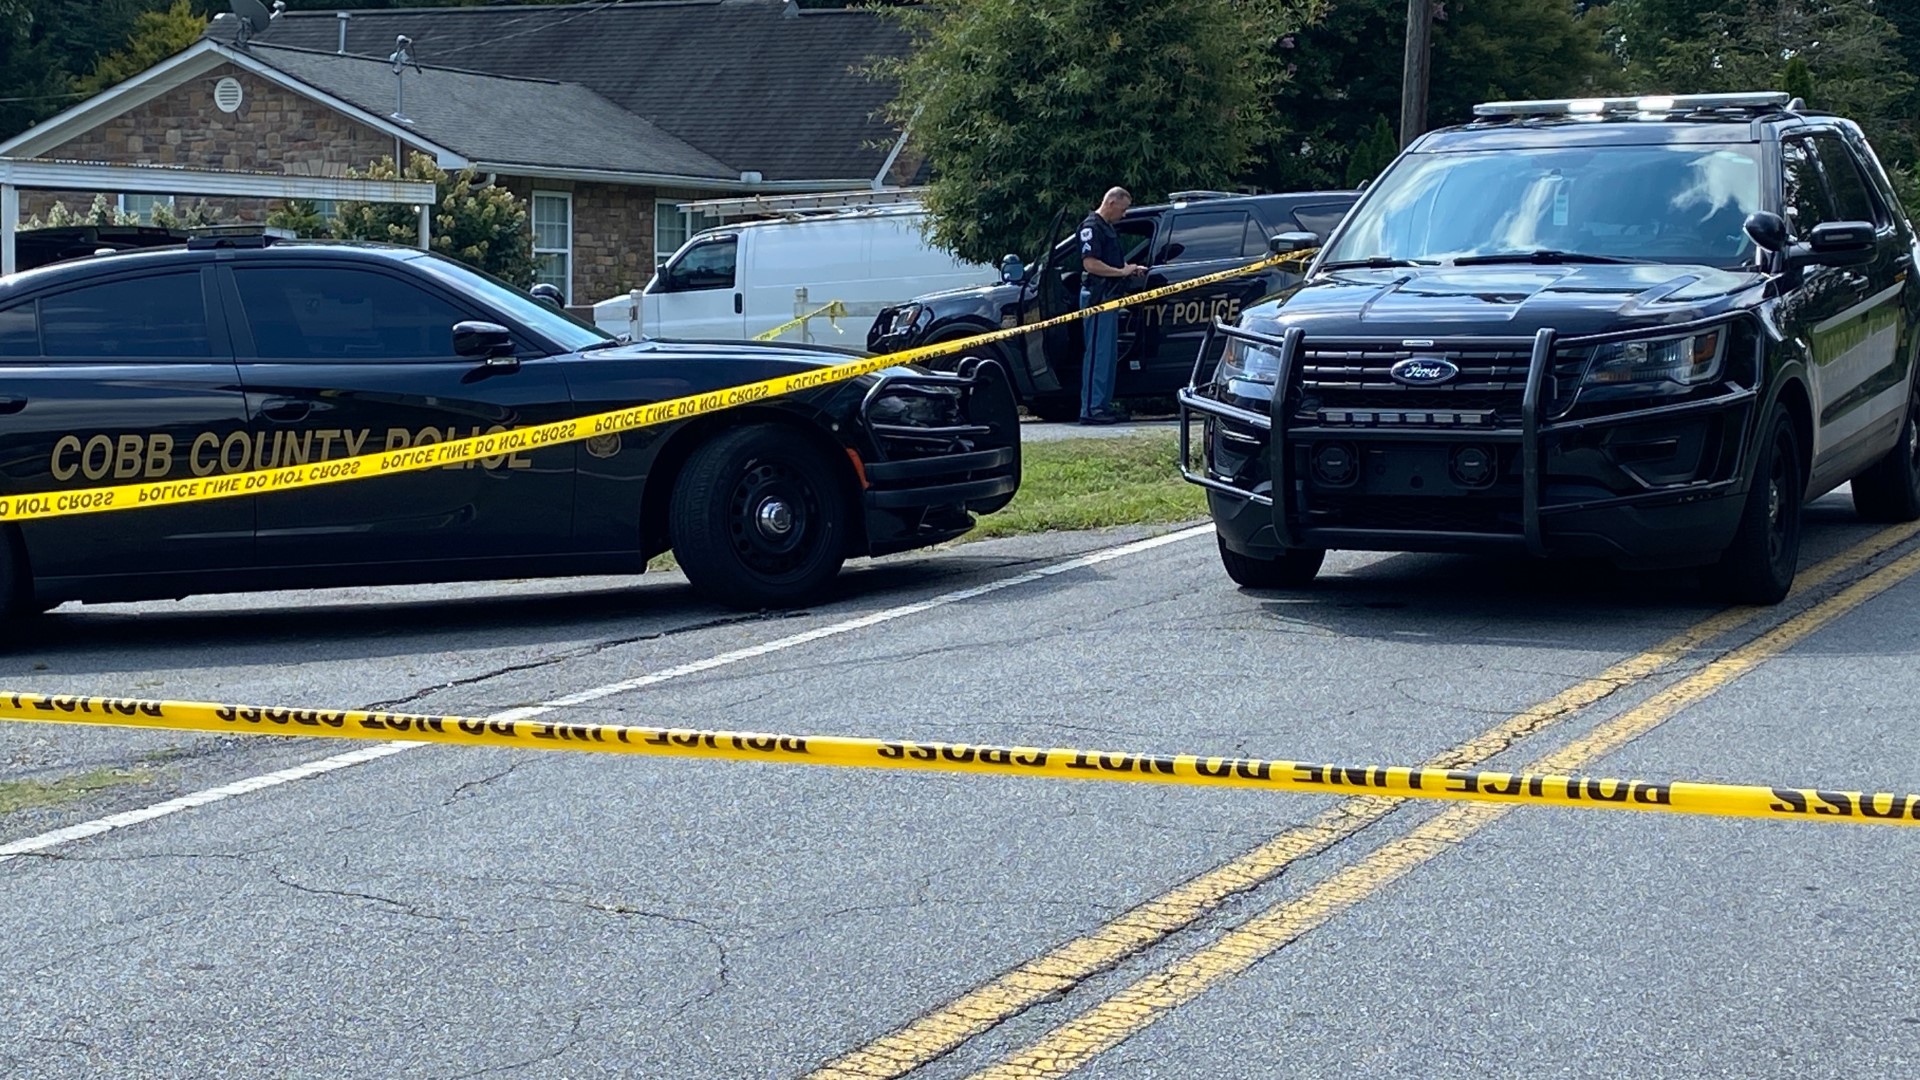 Police said two people were found dead at a scene outside Smyrna on Saturday morning in what they believe is a murder-suicide.